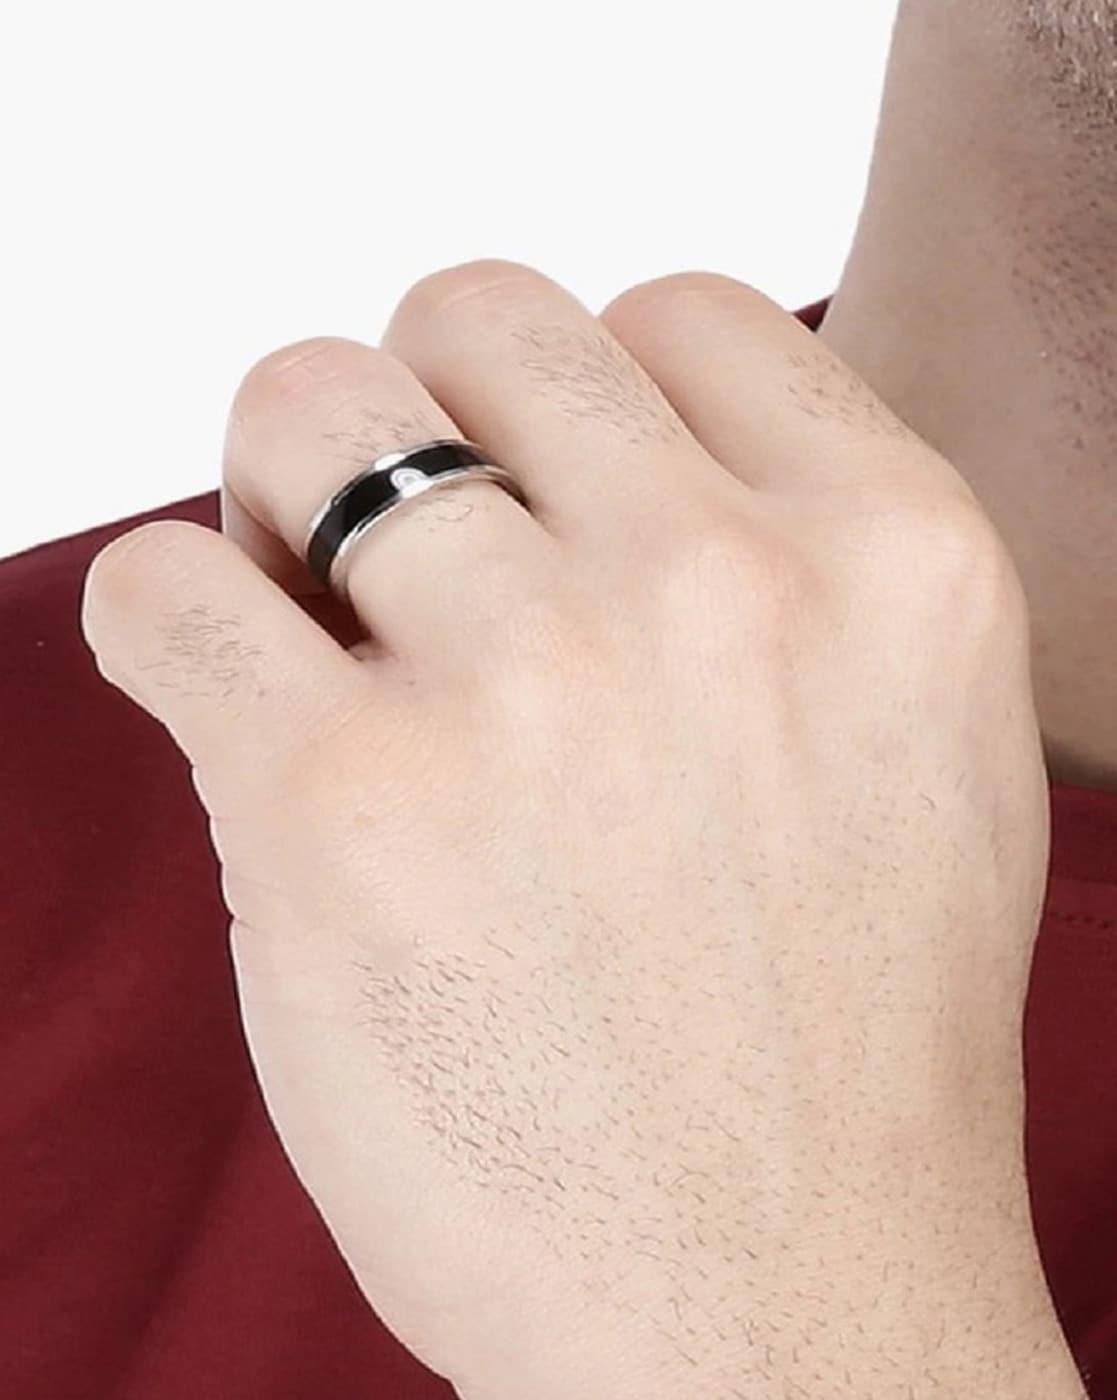 What Does a Black Wedding Ring Mean?